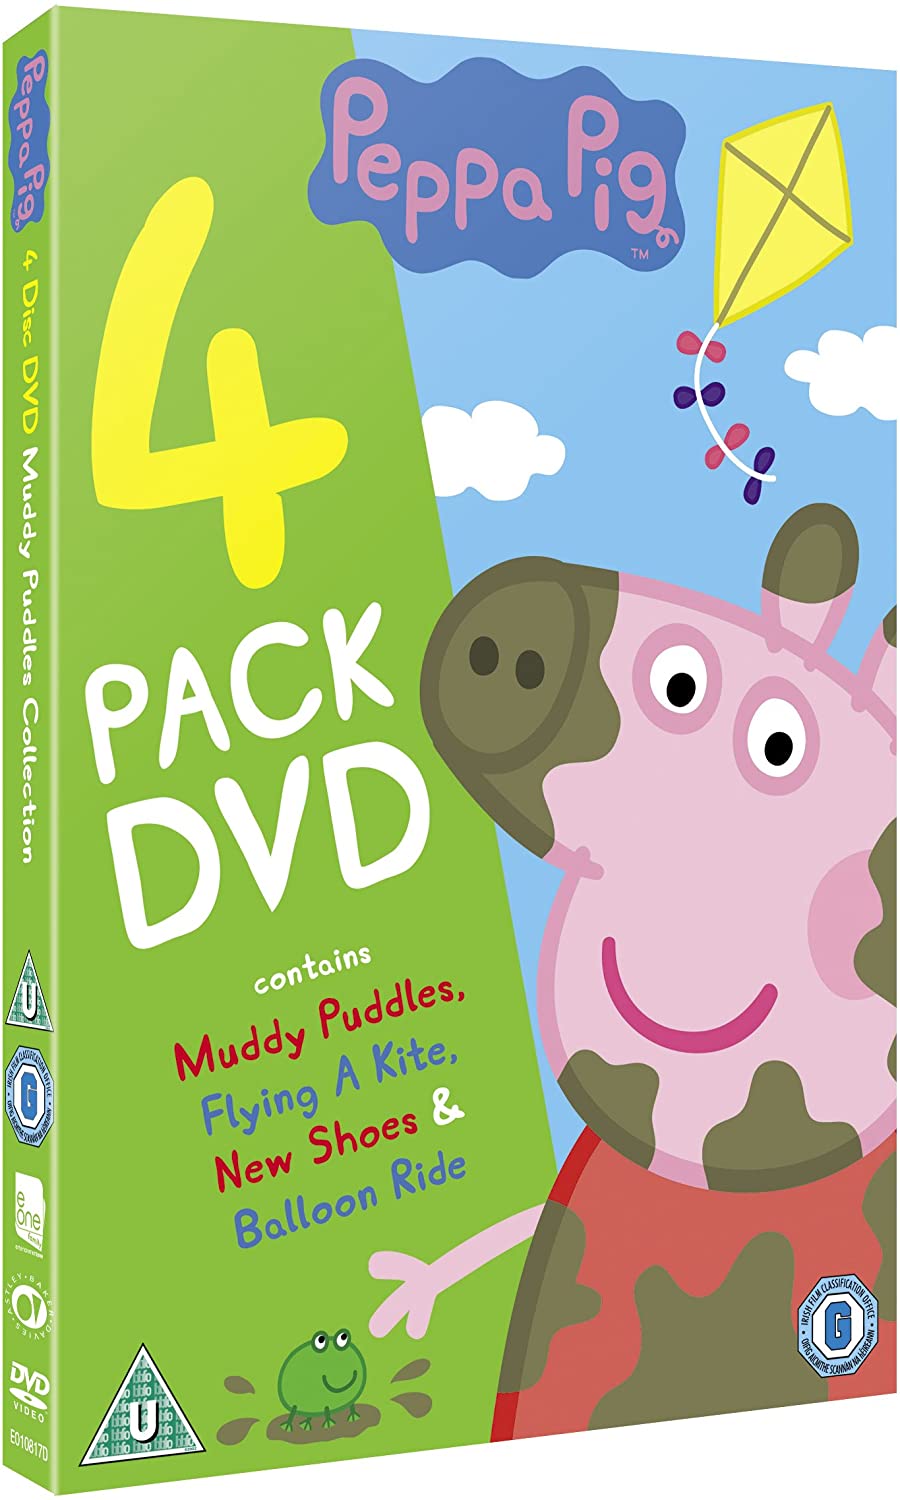 Peppa Pig: The Muddy Puddles Collection